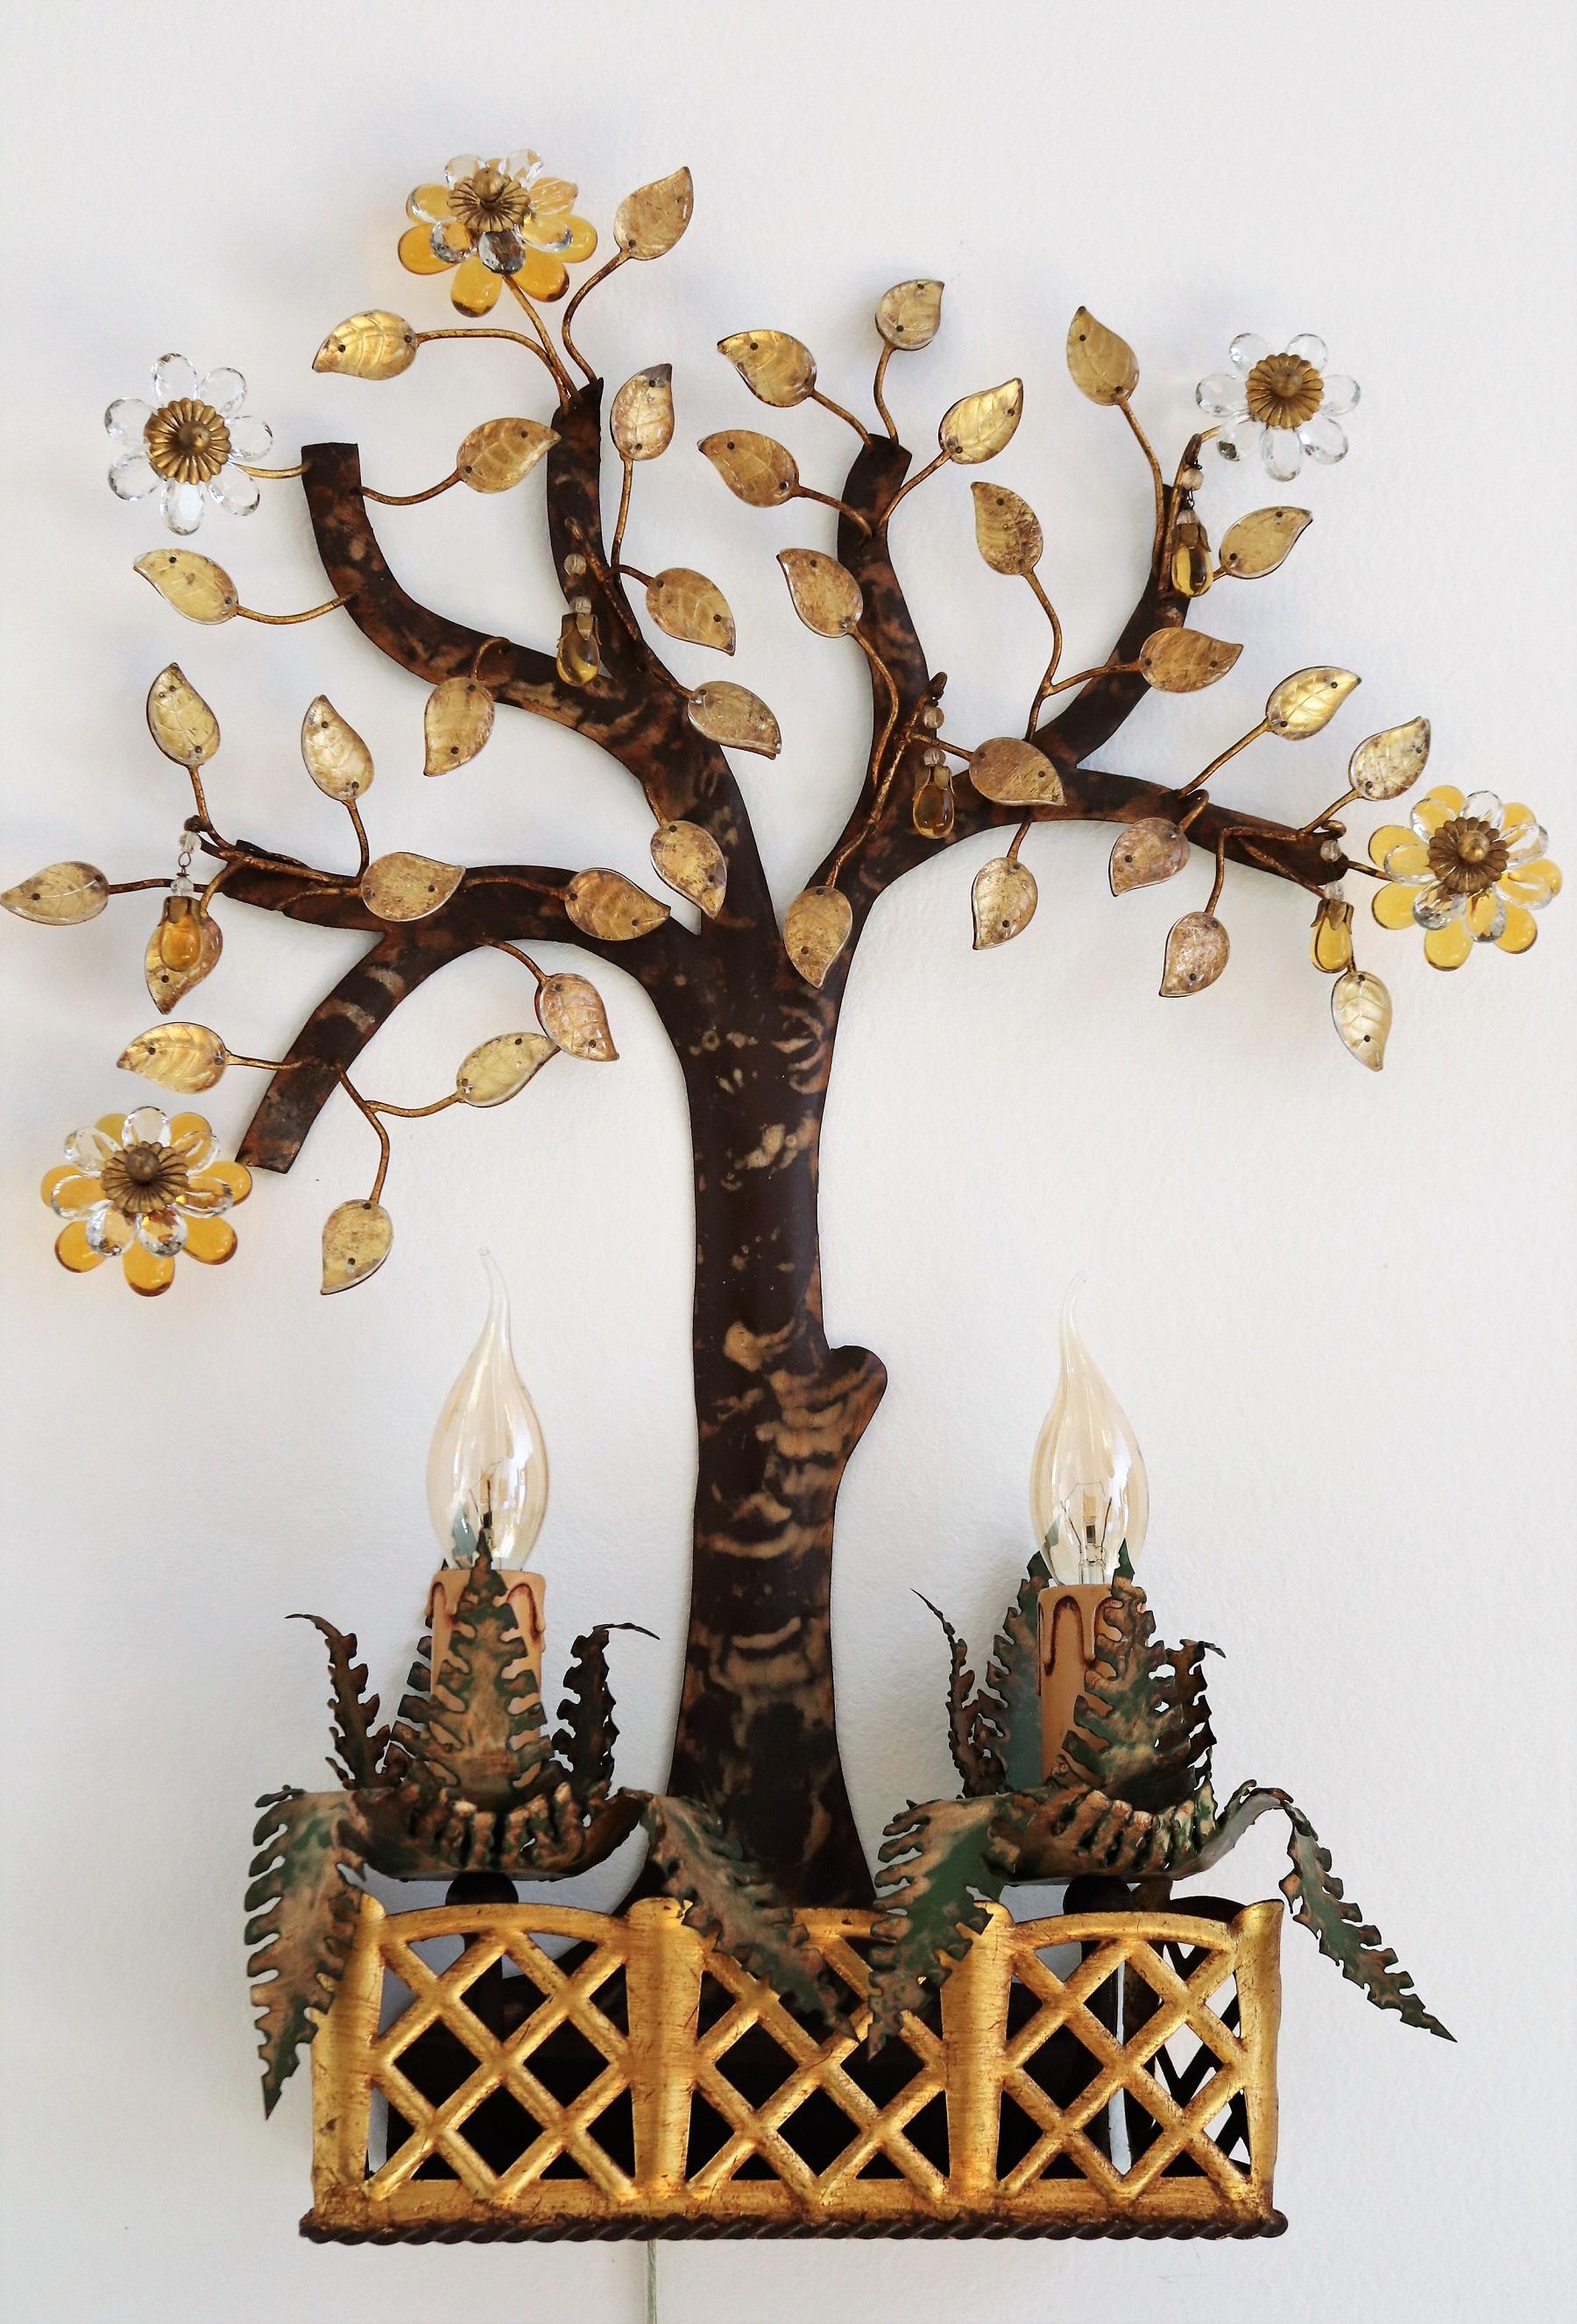 Gorgeous and quite rare playful hand-crafted wall light in the shape of a tree with crystal Leaves and Flowers from Murano.
Handmade by Banci, Florence, in the 1970s.
The wall light is made of painted hand-cut metal and decorated with crystals in